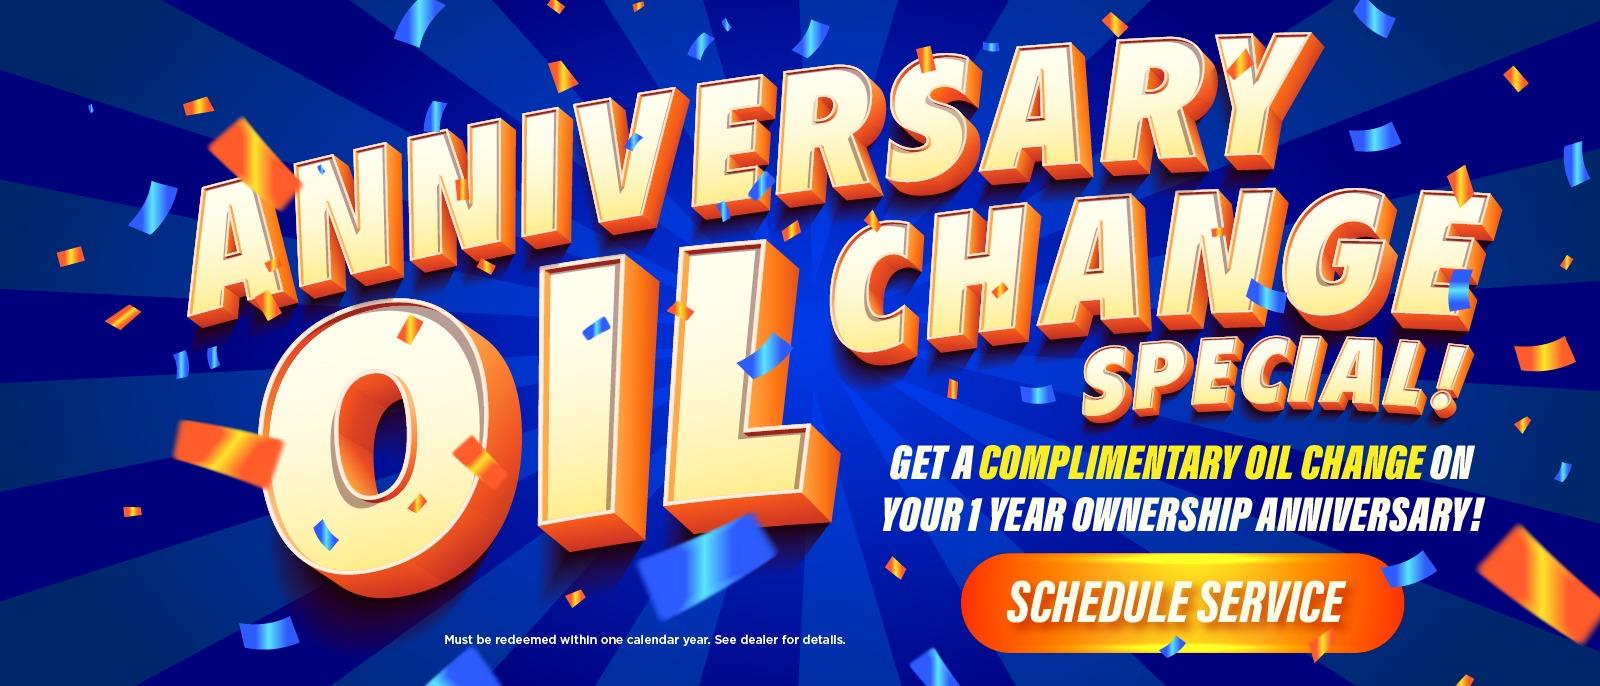 ANNIVERSARY OIL CHANGE SPECIAL!  GET A COMPLIMENTARY OIL CHANGE ON YOUR 1 YEAR OWNERSHIP ANNIVERSARY!